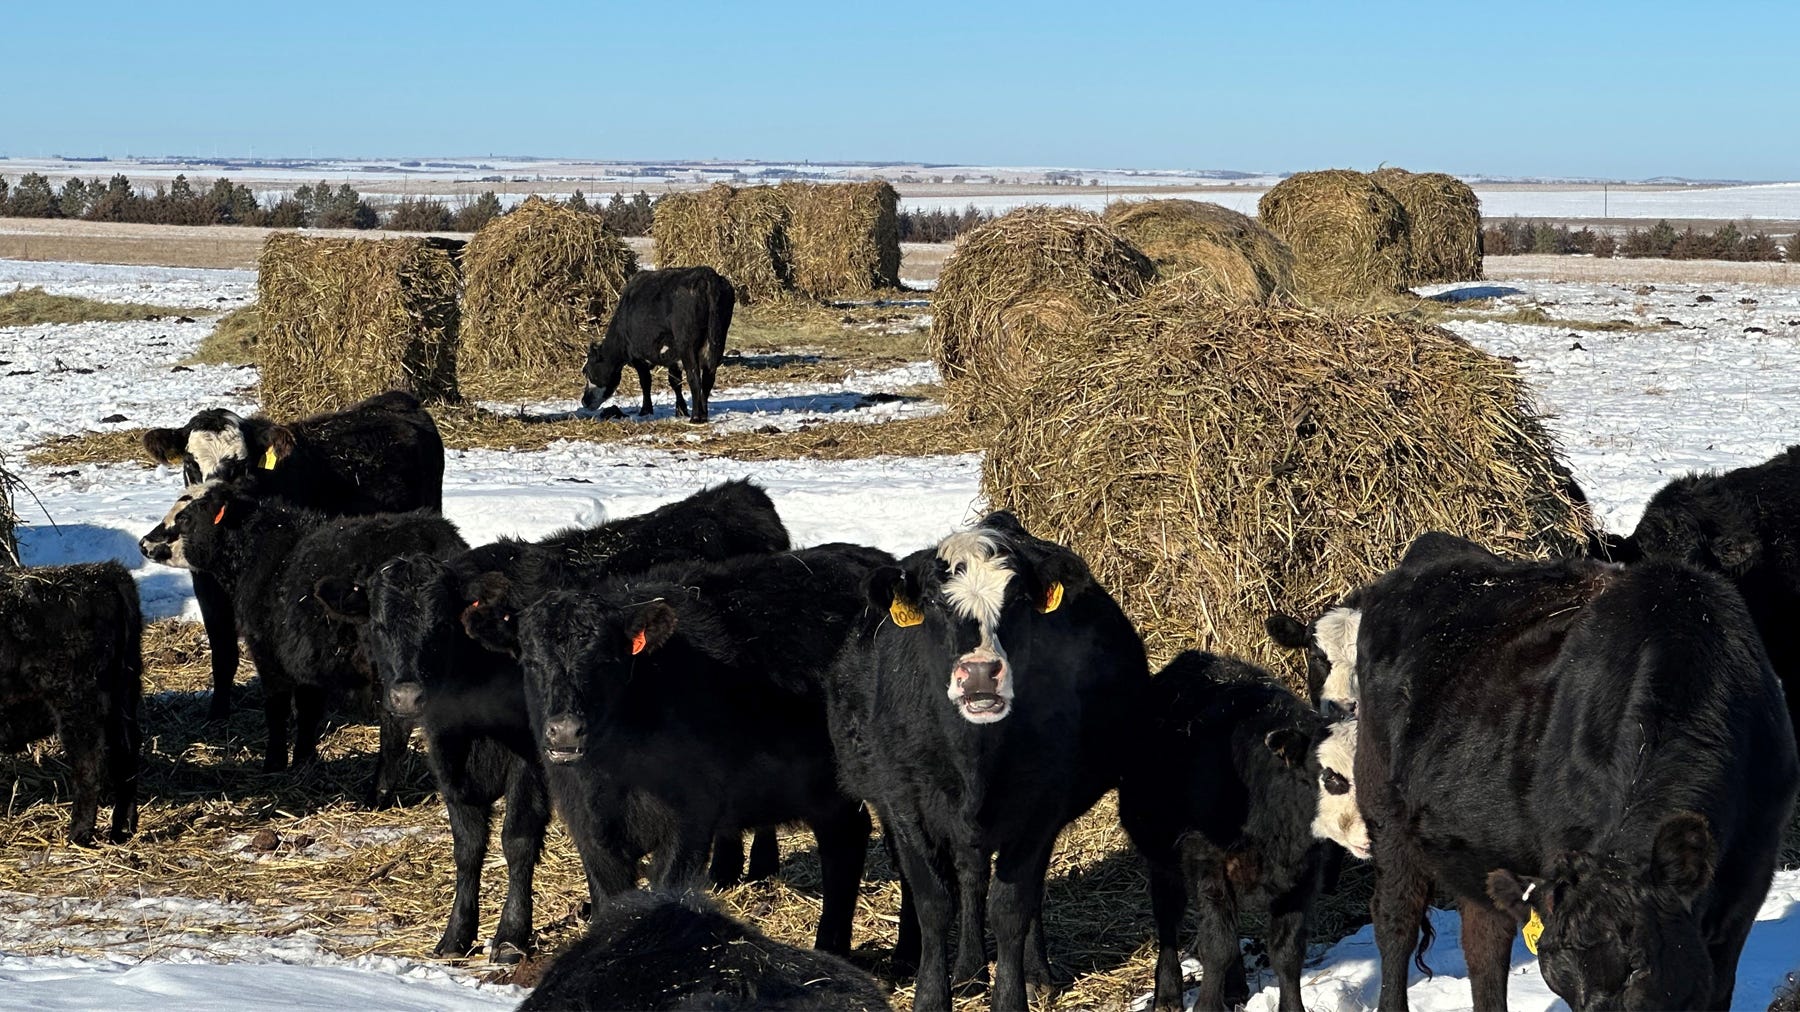 Cattle grazing amongst bales of hay